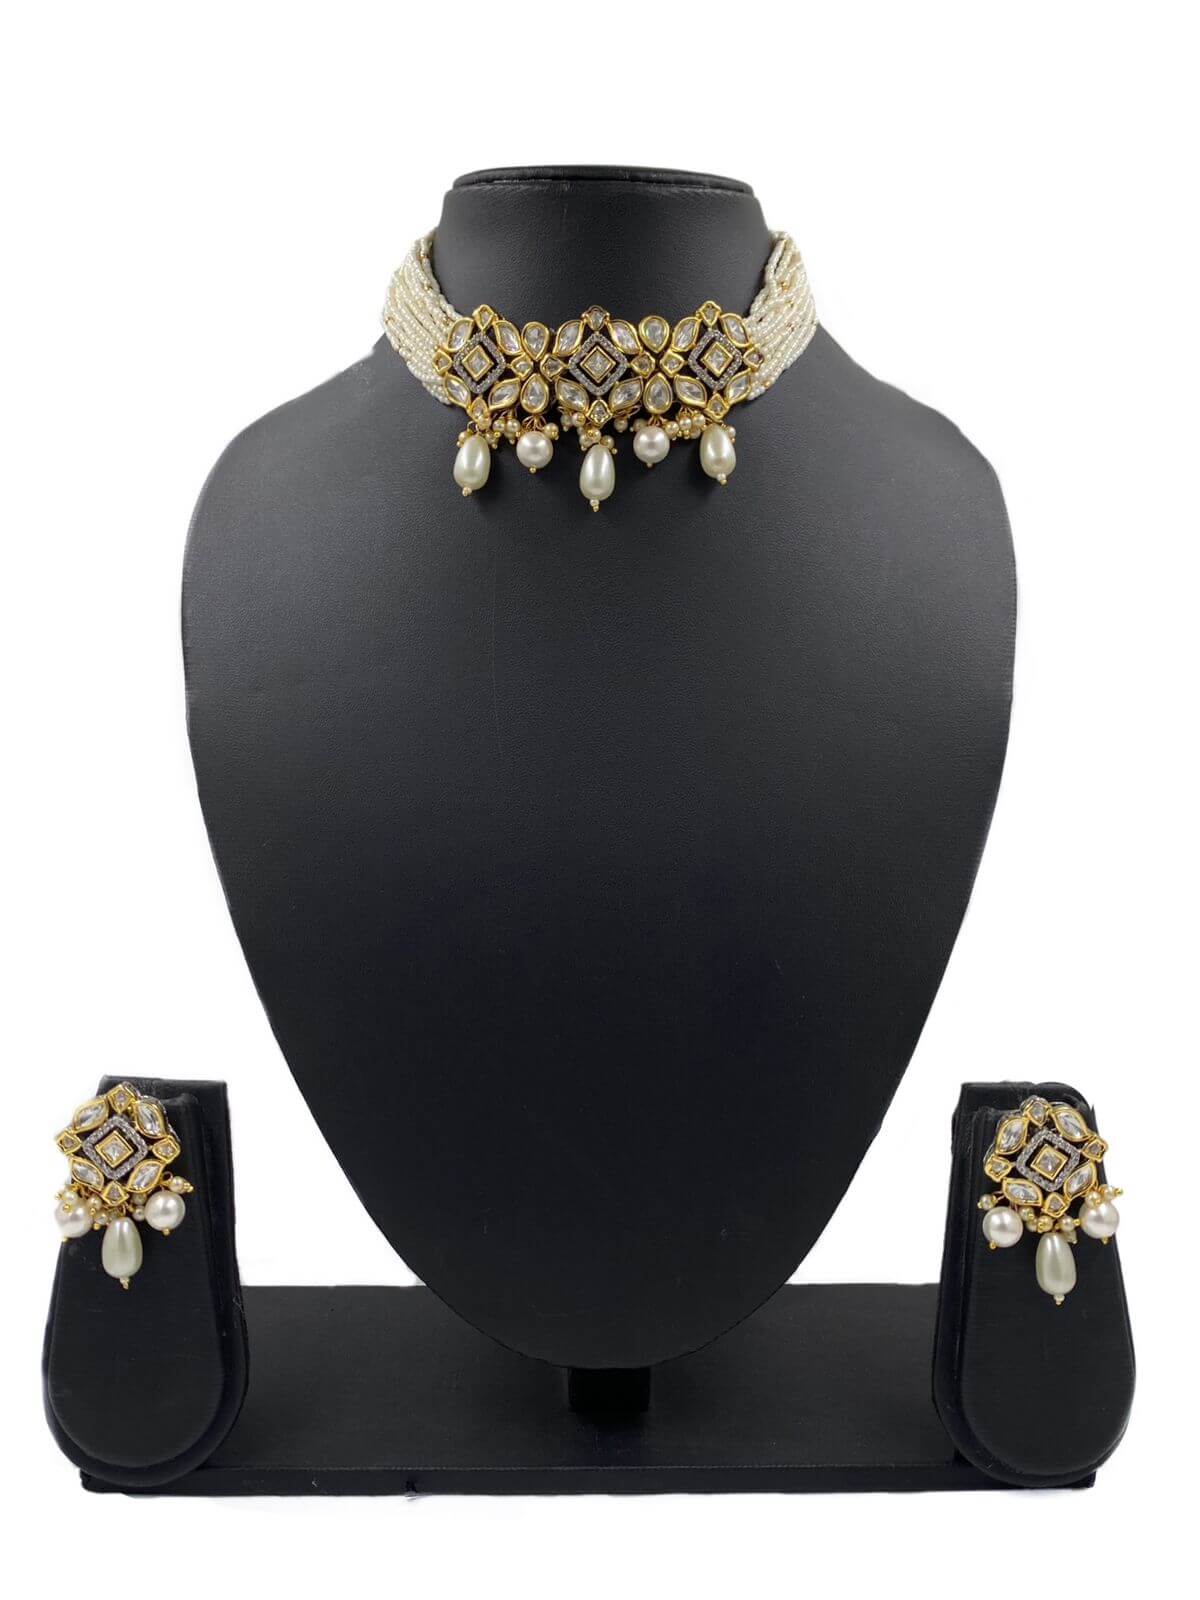 Modern Look Victorian Polki And Pearls Choker Necklace Set